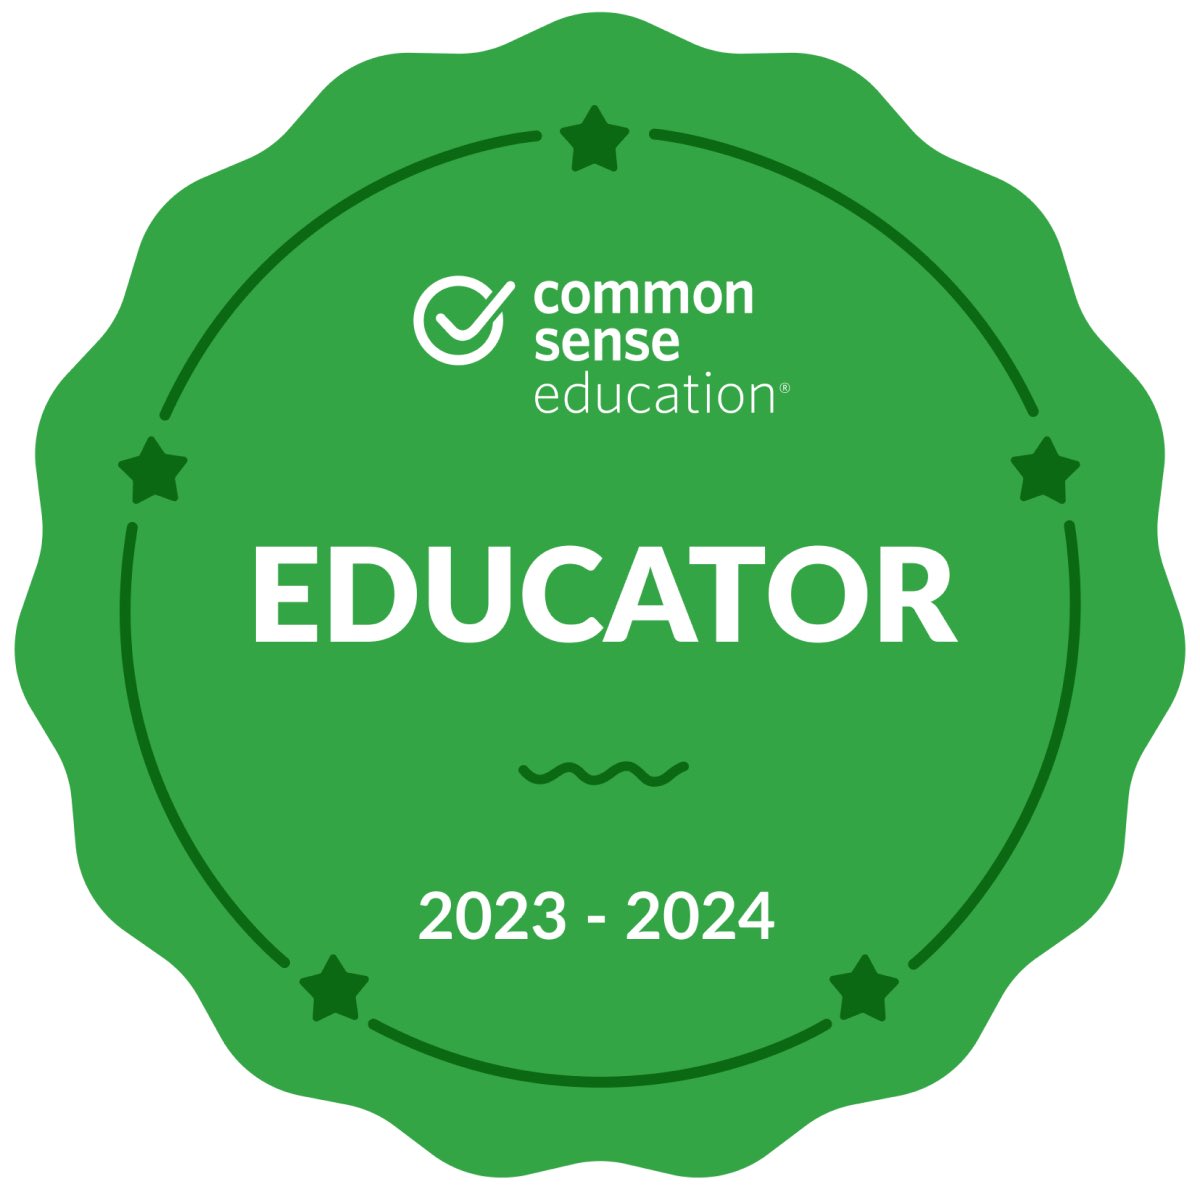 Proud to be part of a community committed to helping students thrive online and in life! Added this certification! #commonsenseeducator #edtech @CommonSenseEd